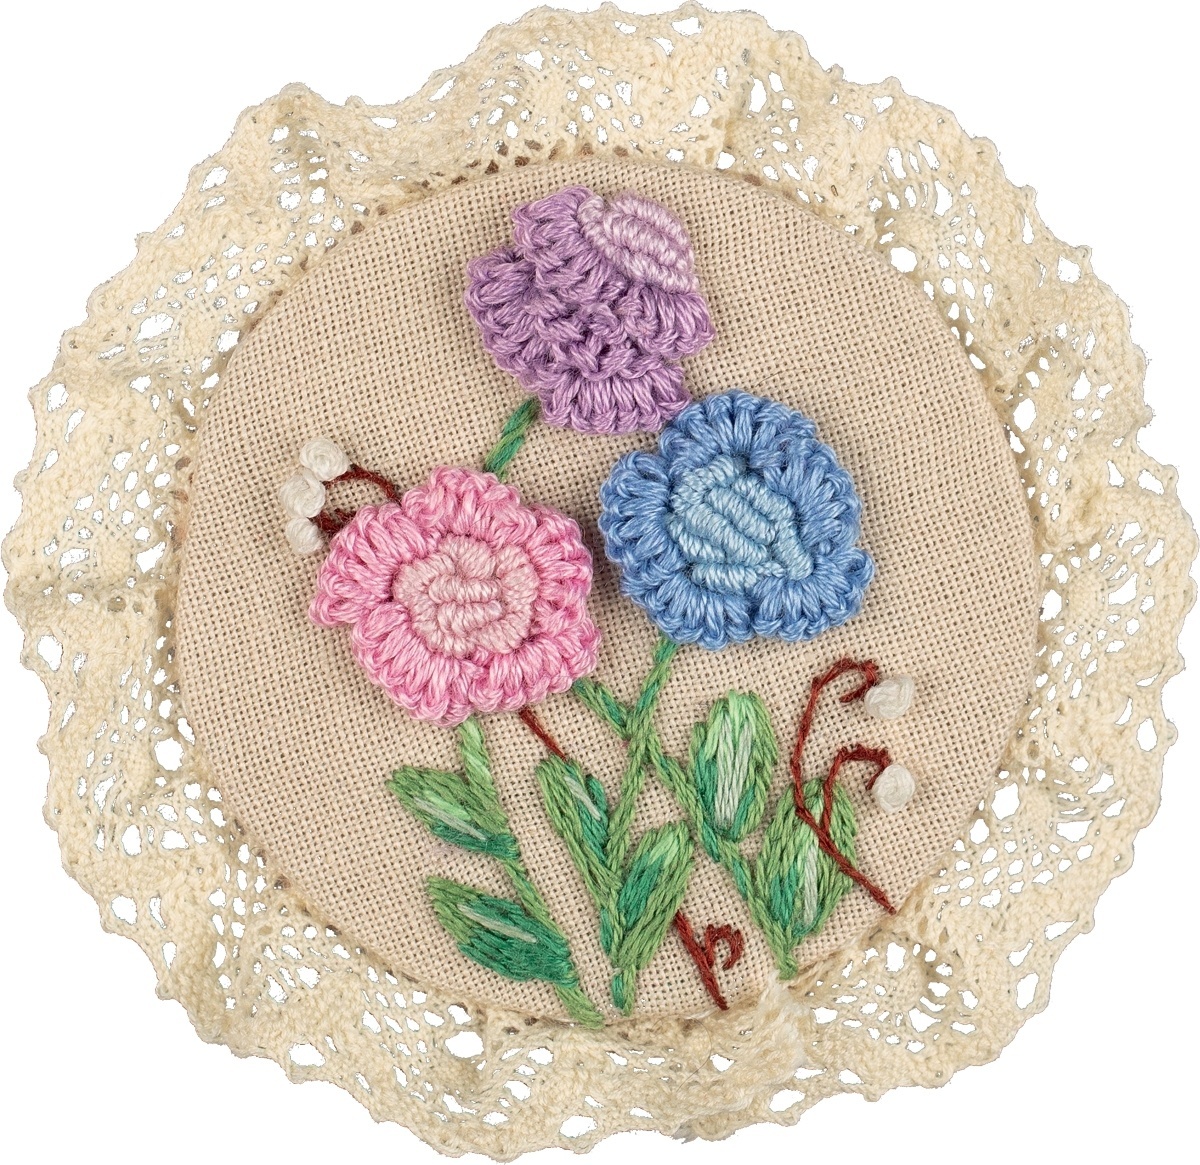 Vintage Brooches. Clover and Sweet Pea Embroidery Kit фото 6